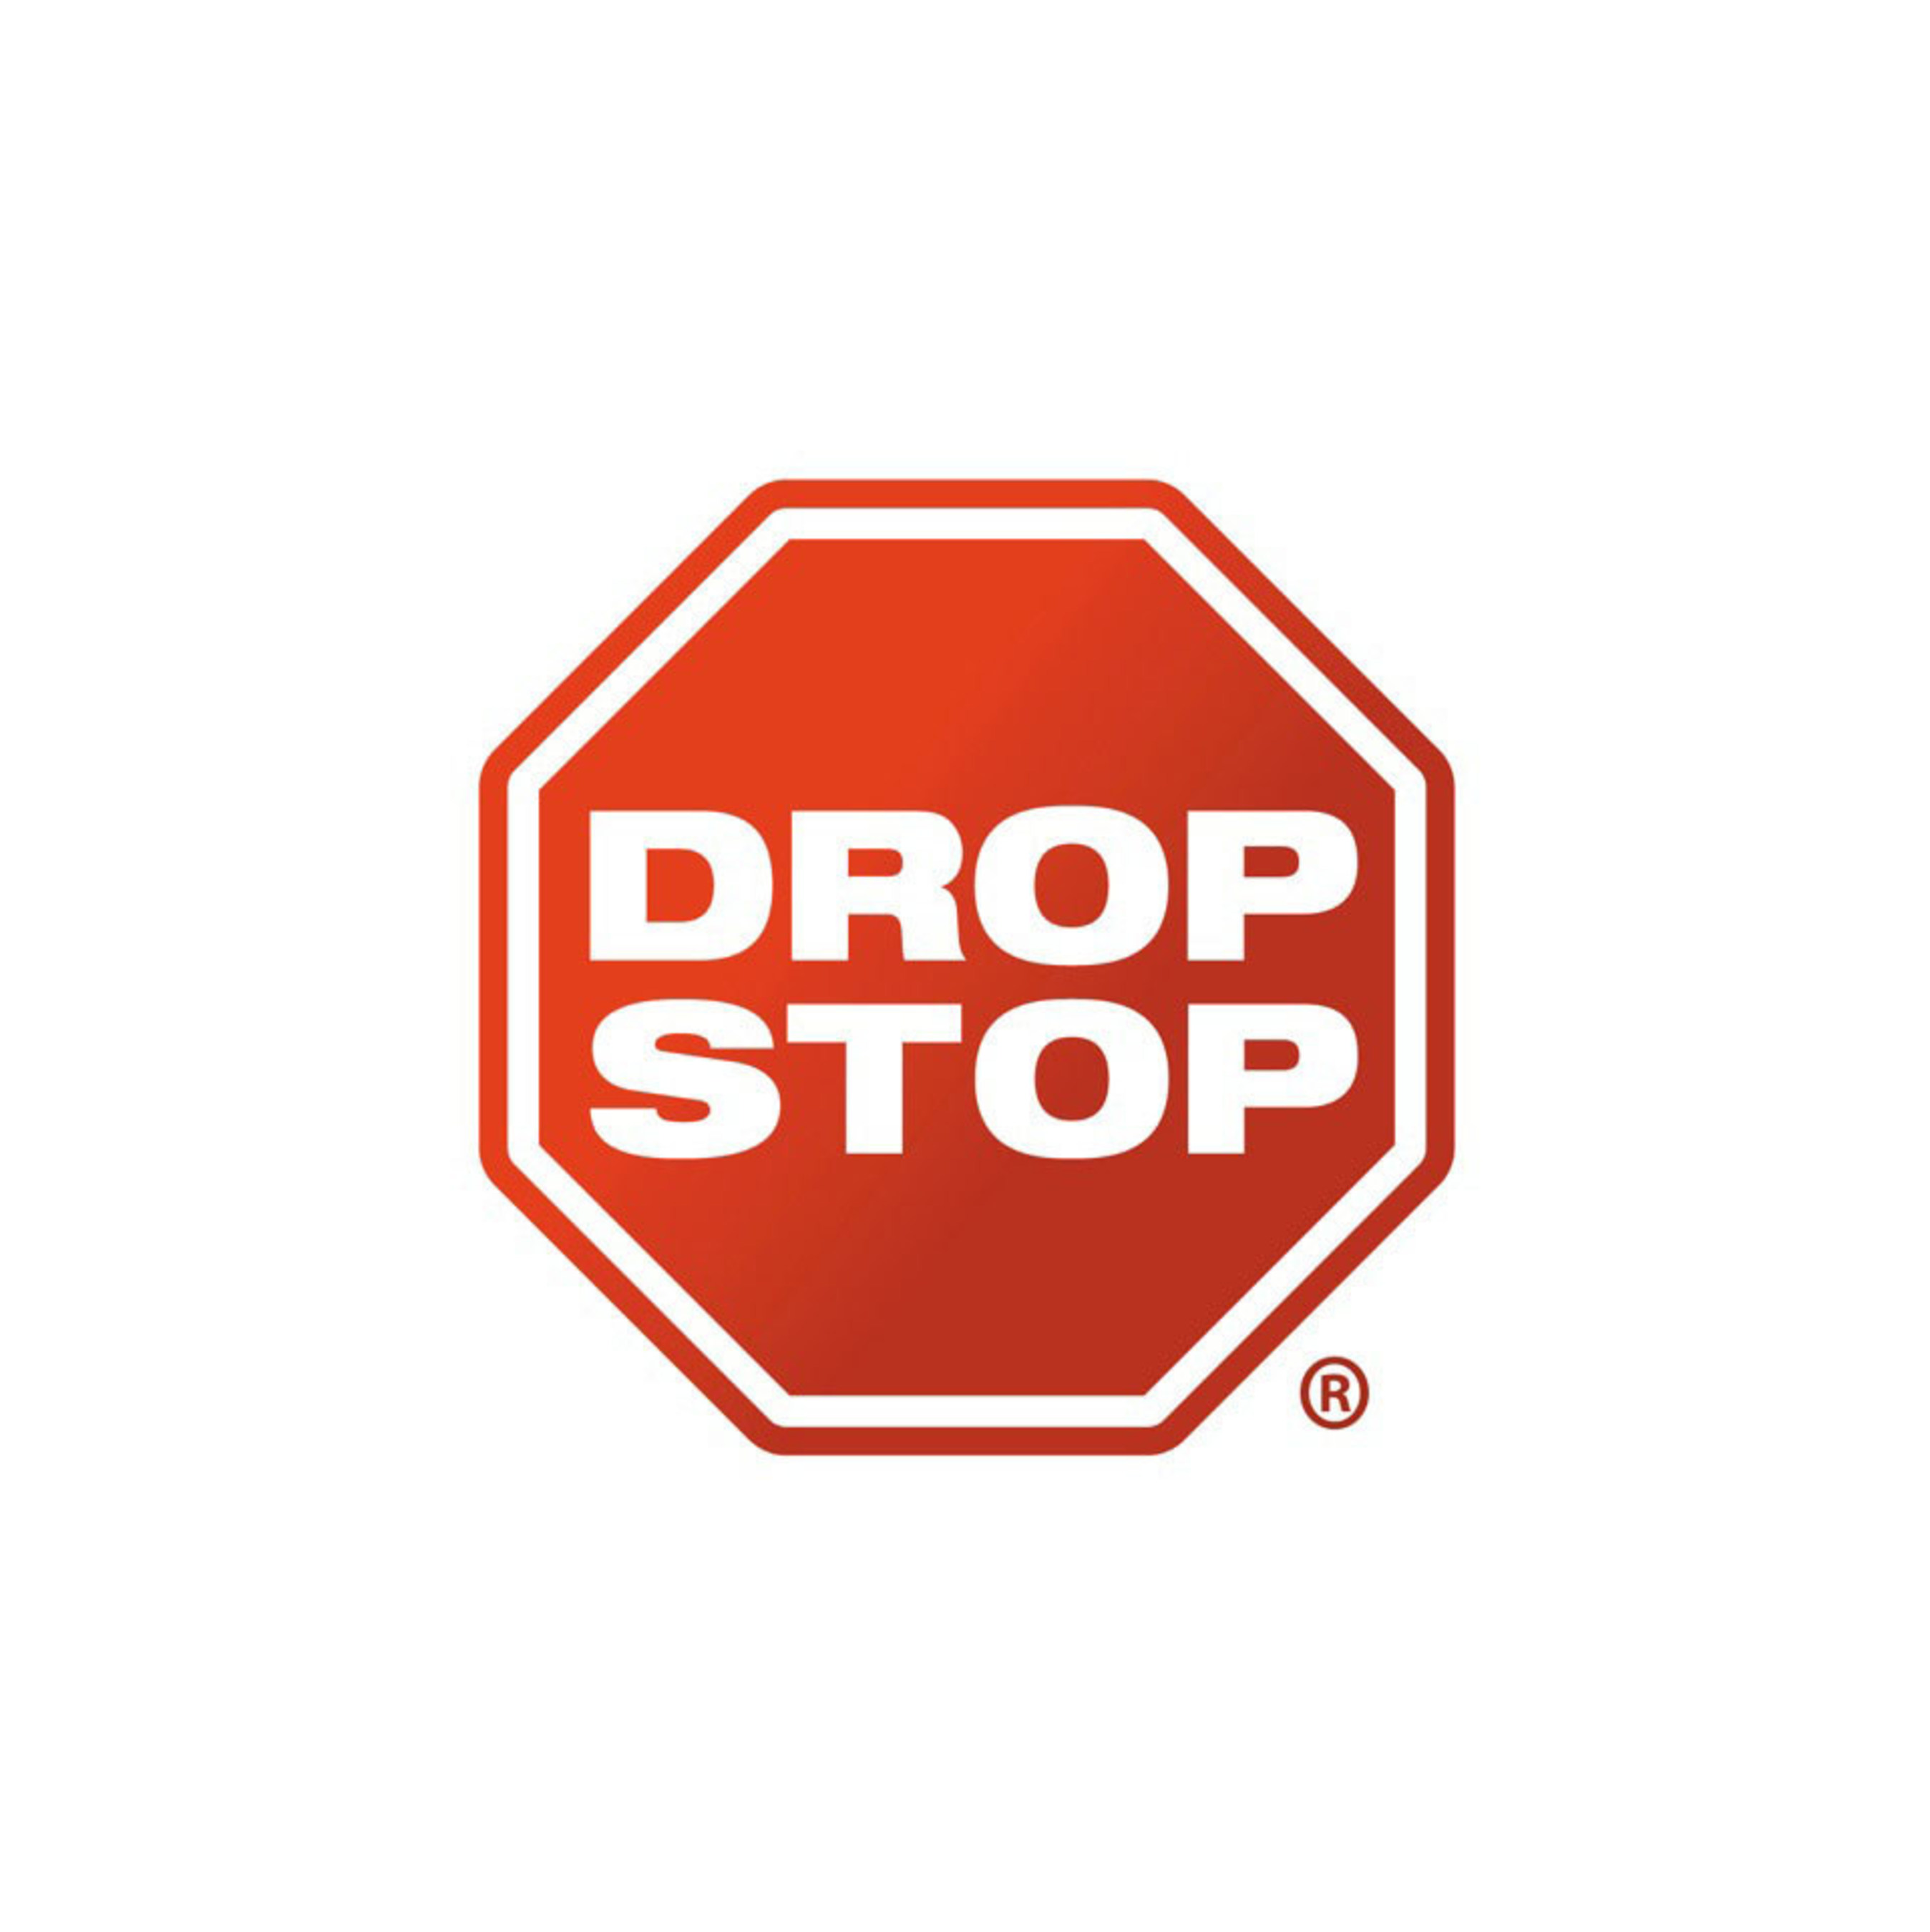 Drop Stop premieres on the Howard Stern Show in 4th Quarter of 2014.